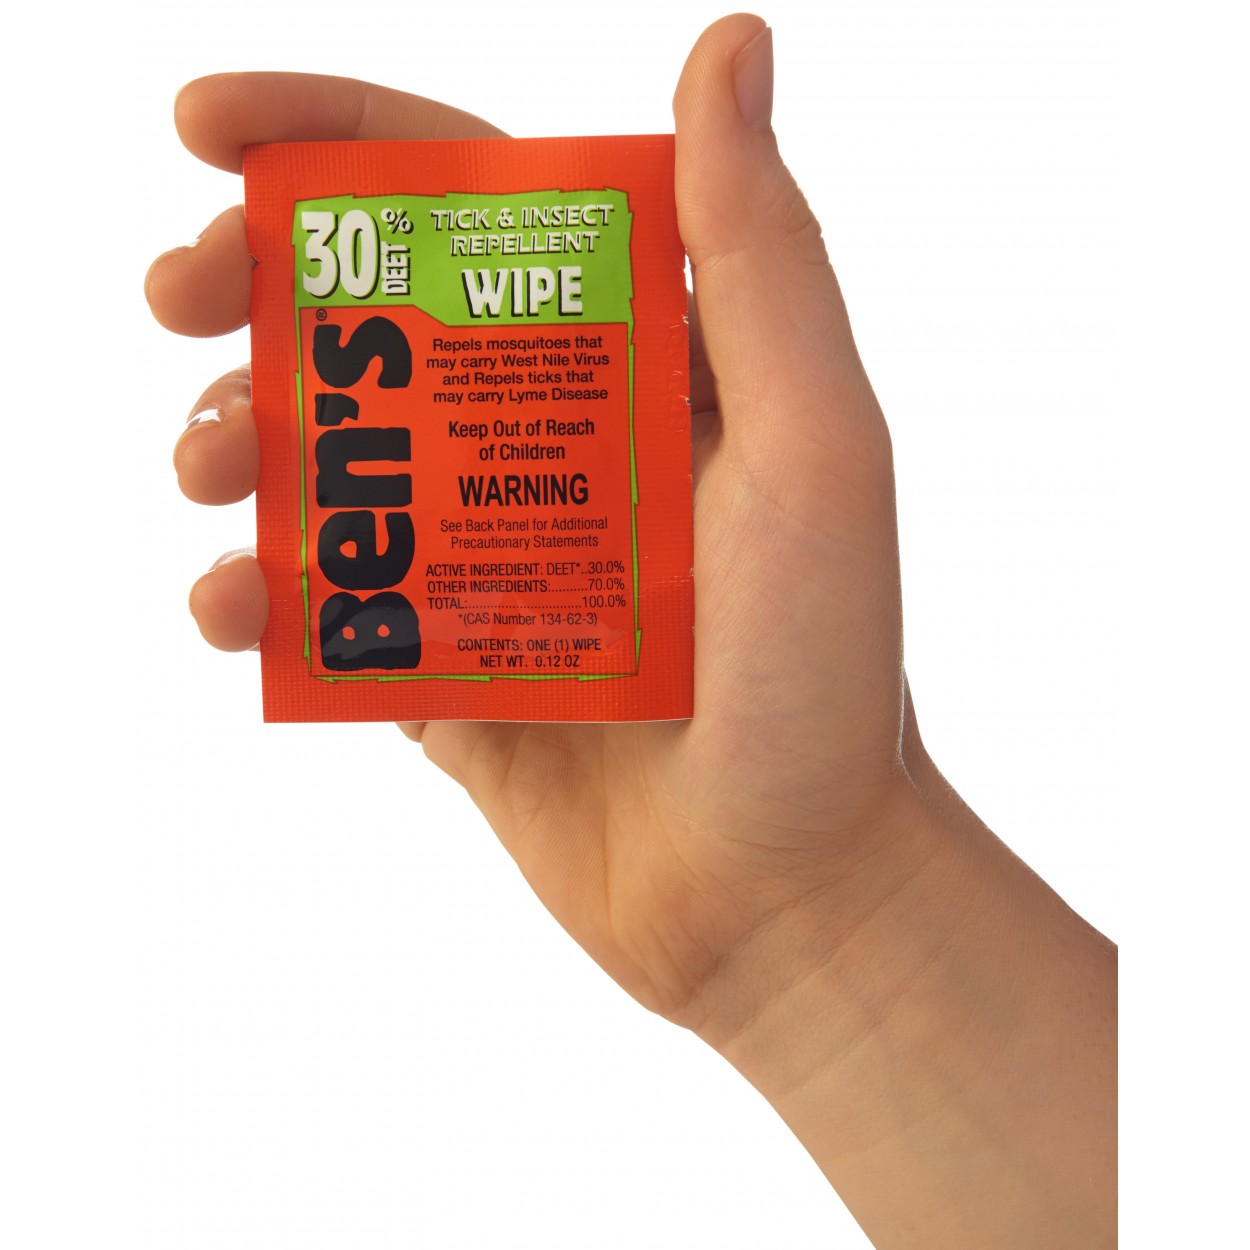 Ben's 30 Tick and Insect Repellent Wipes from Columbia Safety